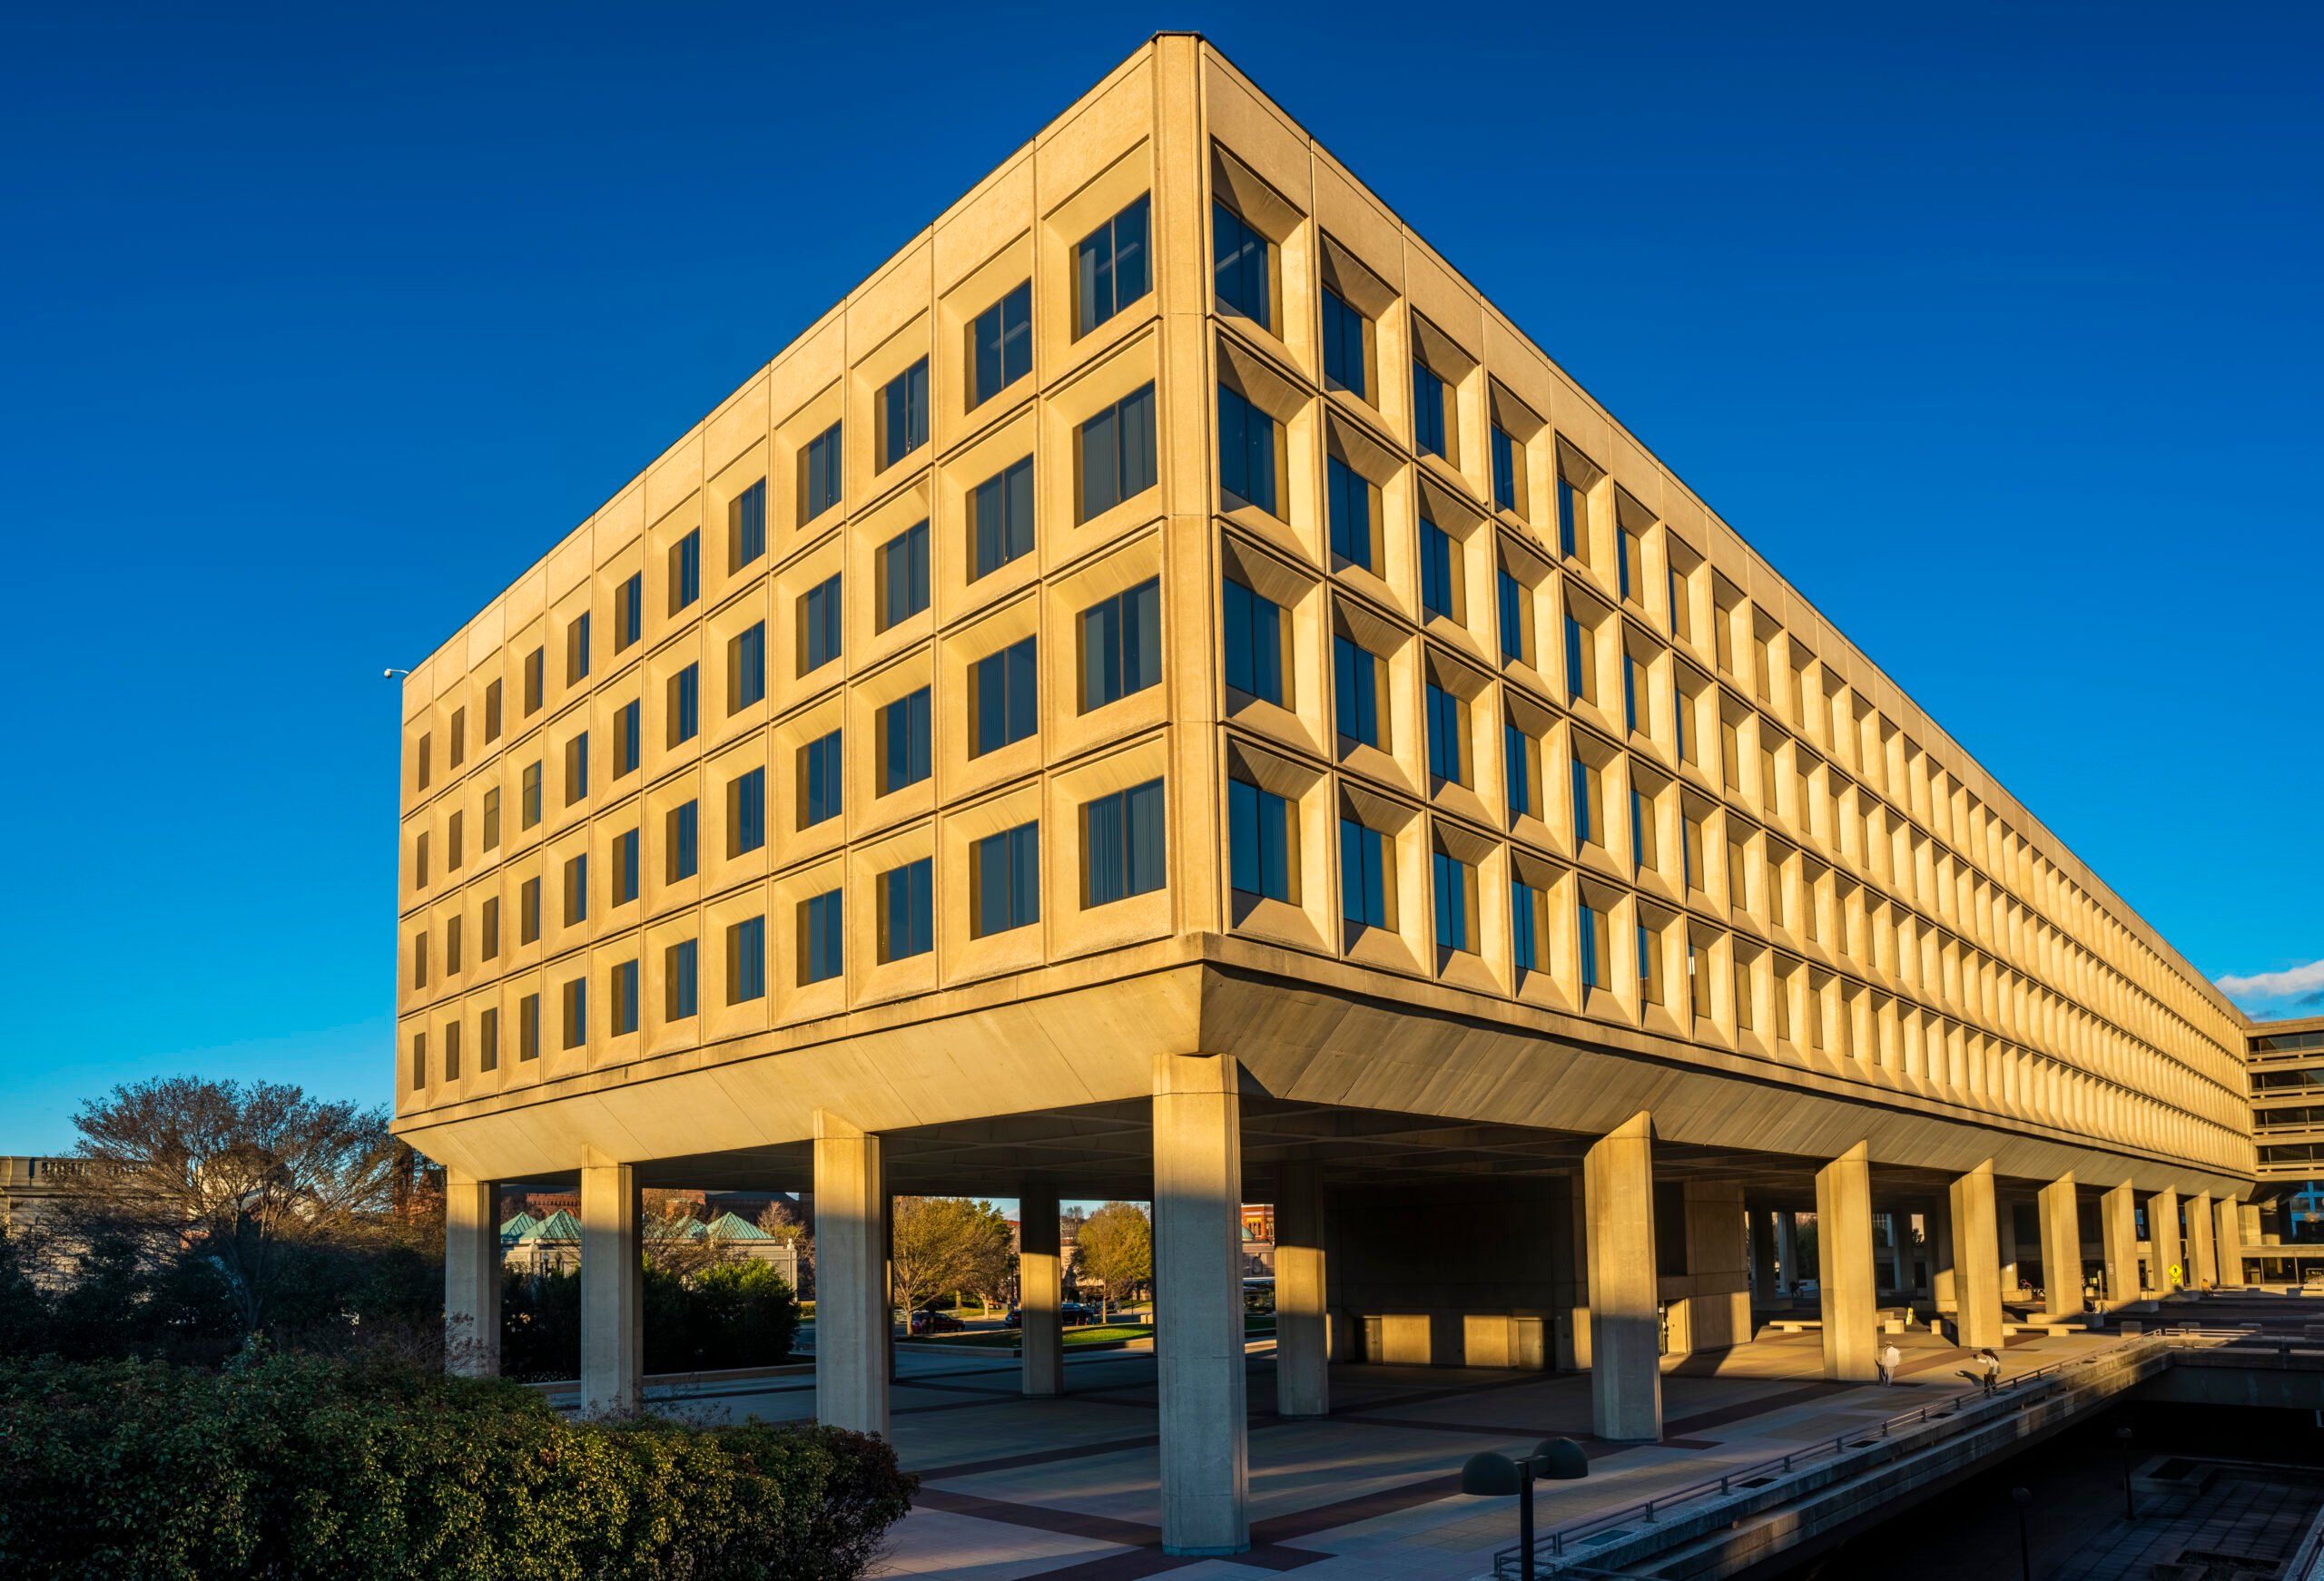 Photo of the the Department of Energy Building in downtown Washington DC, USA, against a blue backdrop.